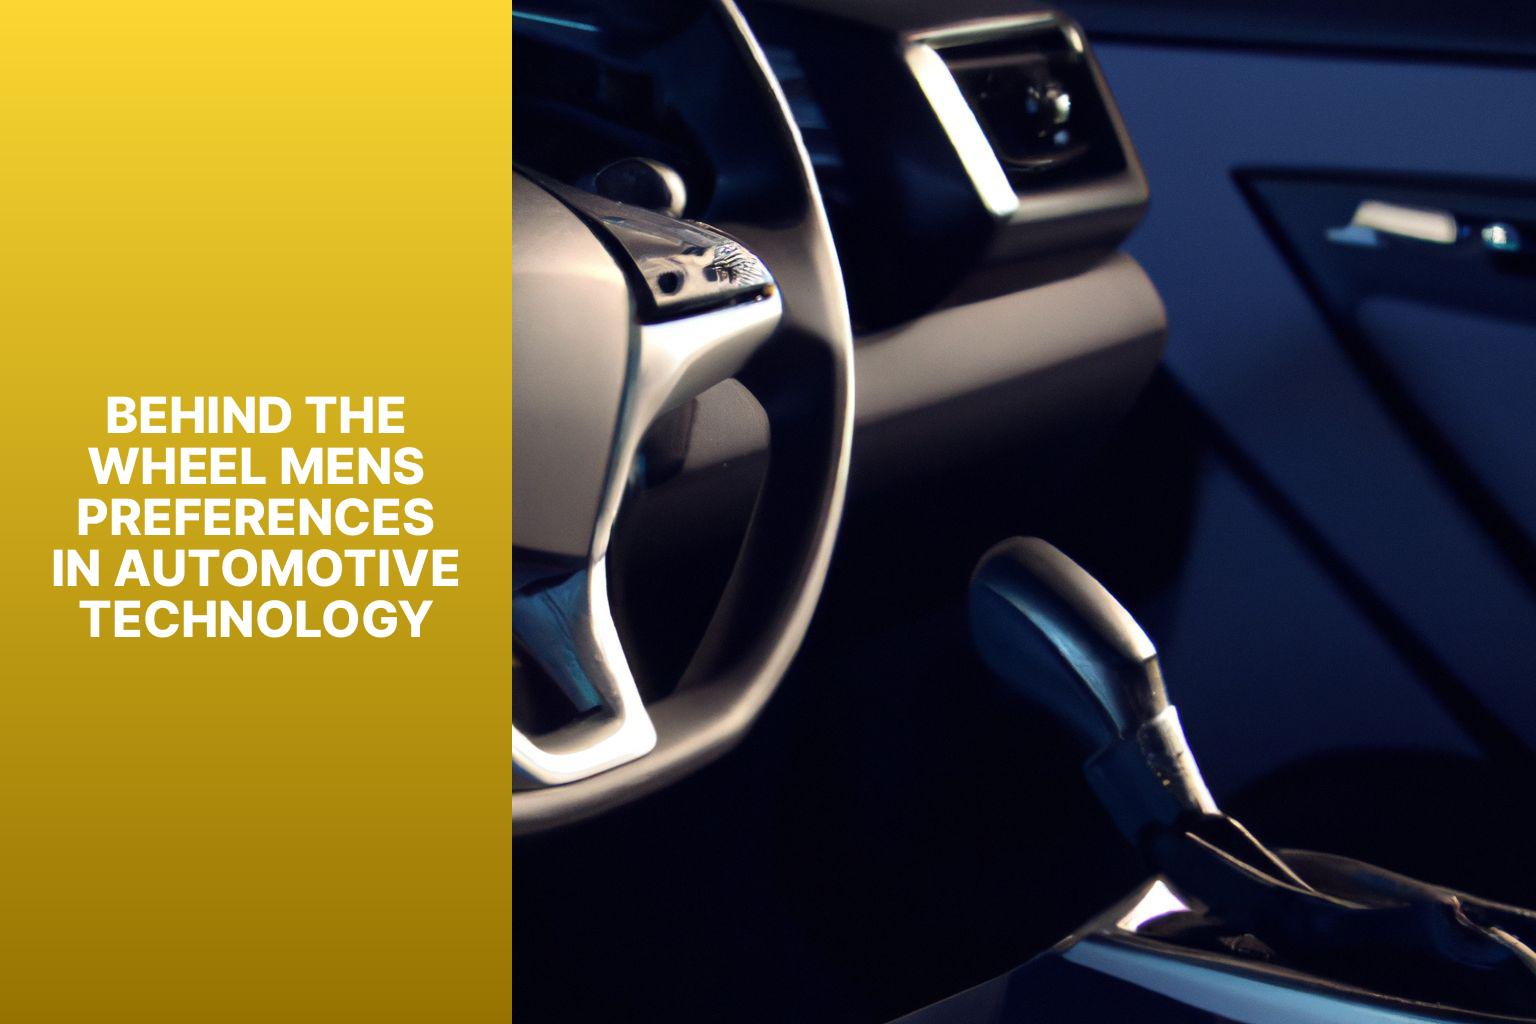 Behind the Wheel: Men’s Preferences in Automotive Technology